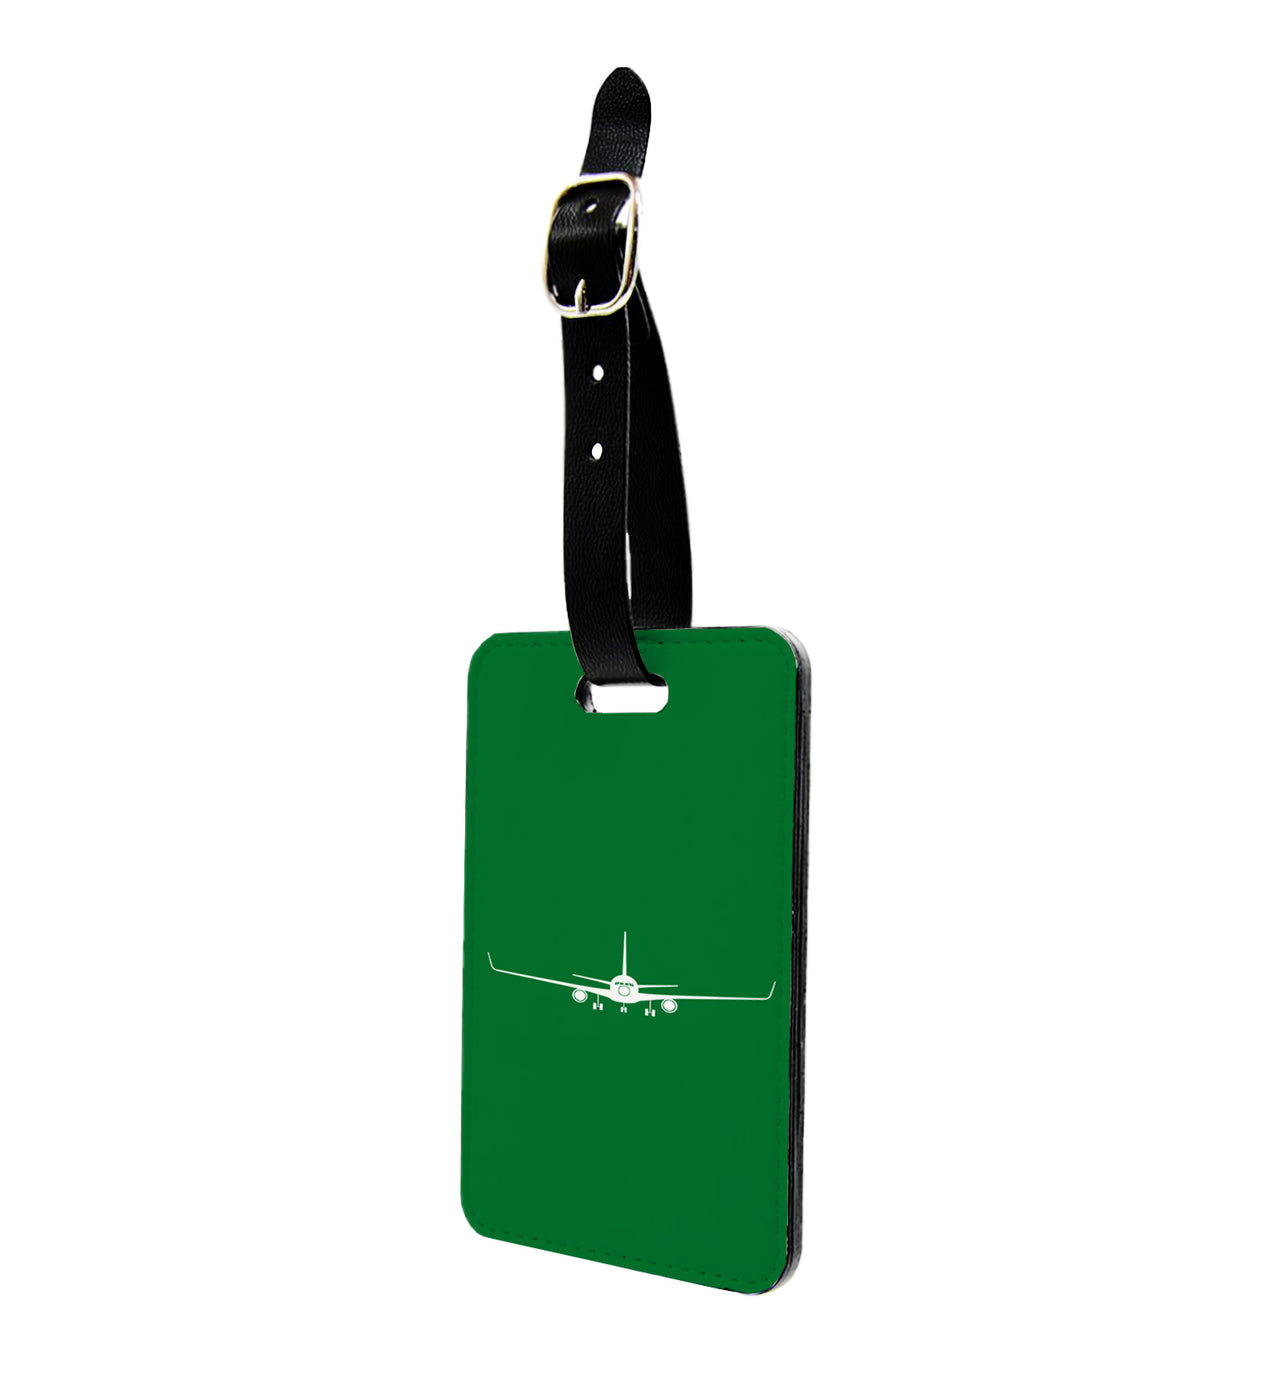 Boeing 767 Silhouette Designed Luggage Tag